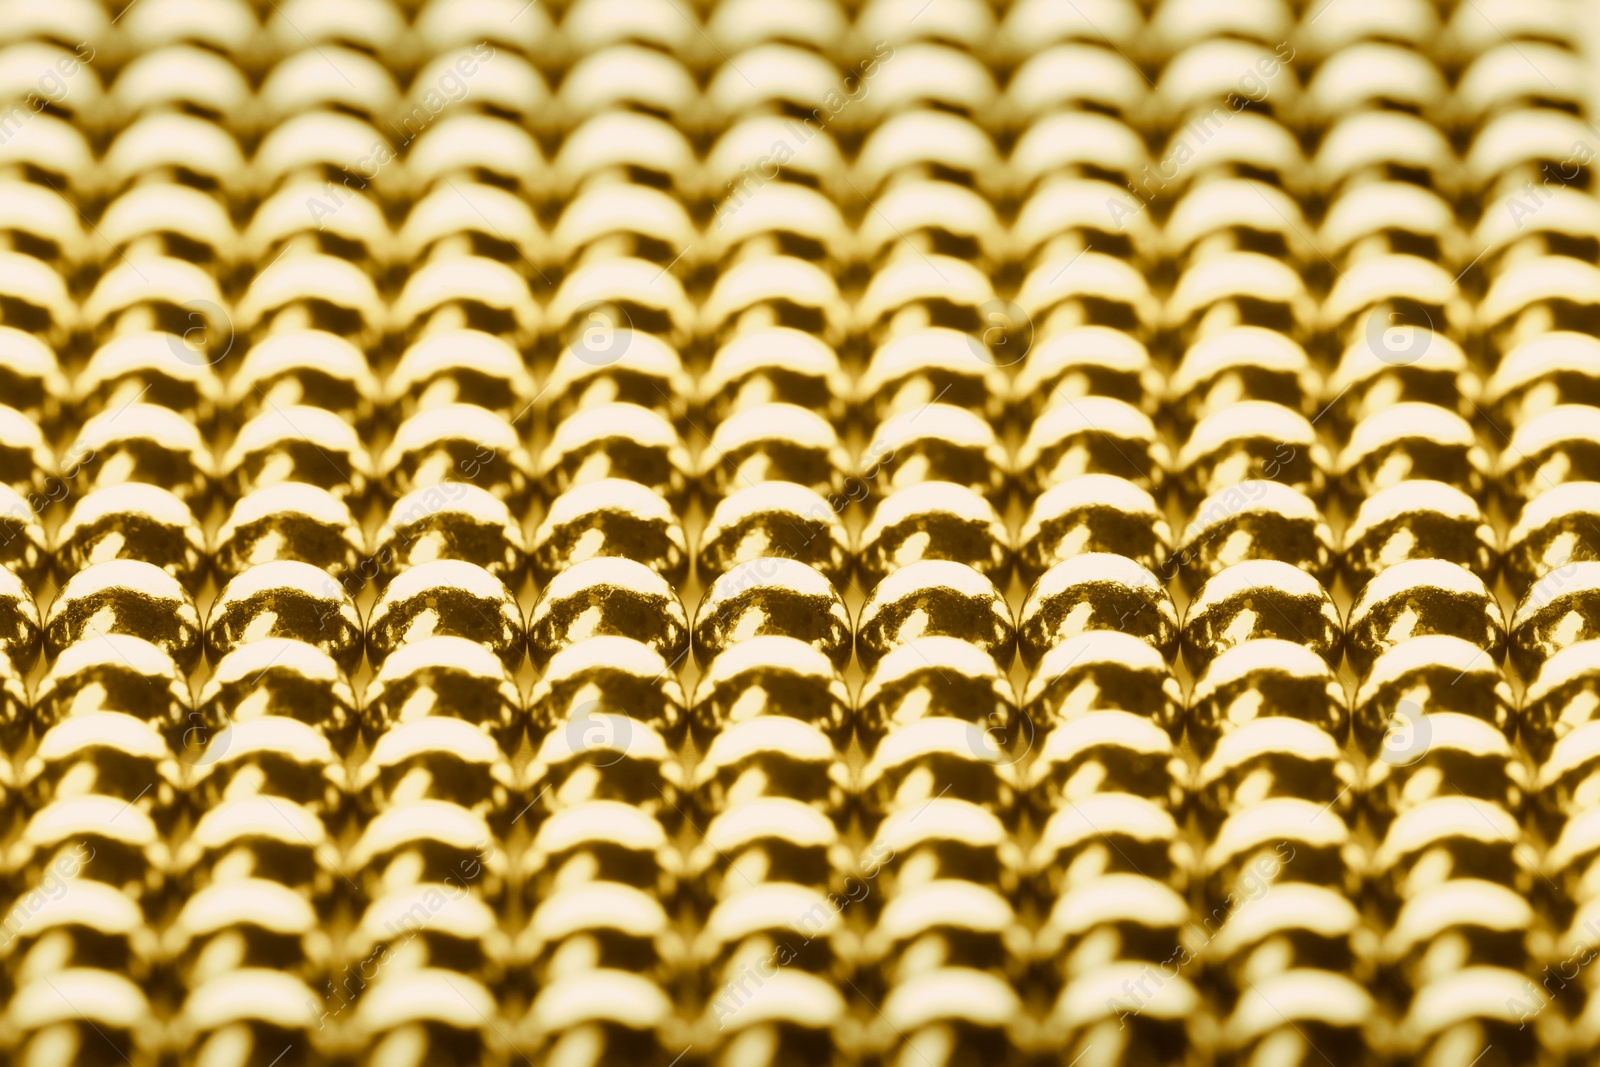 Image of Small golden magnetic balls as background, closeup